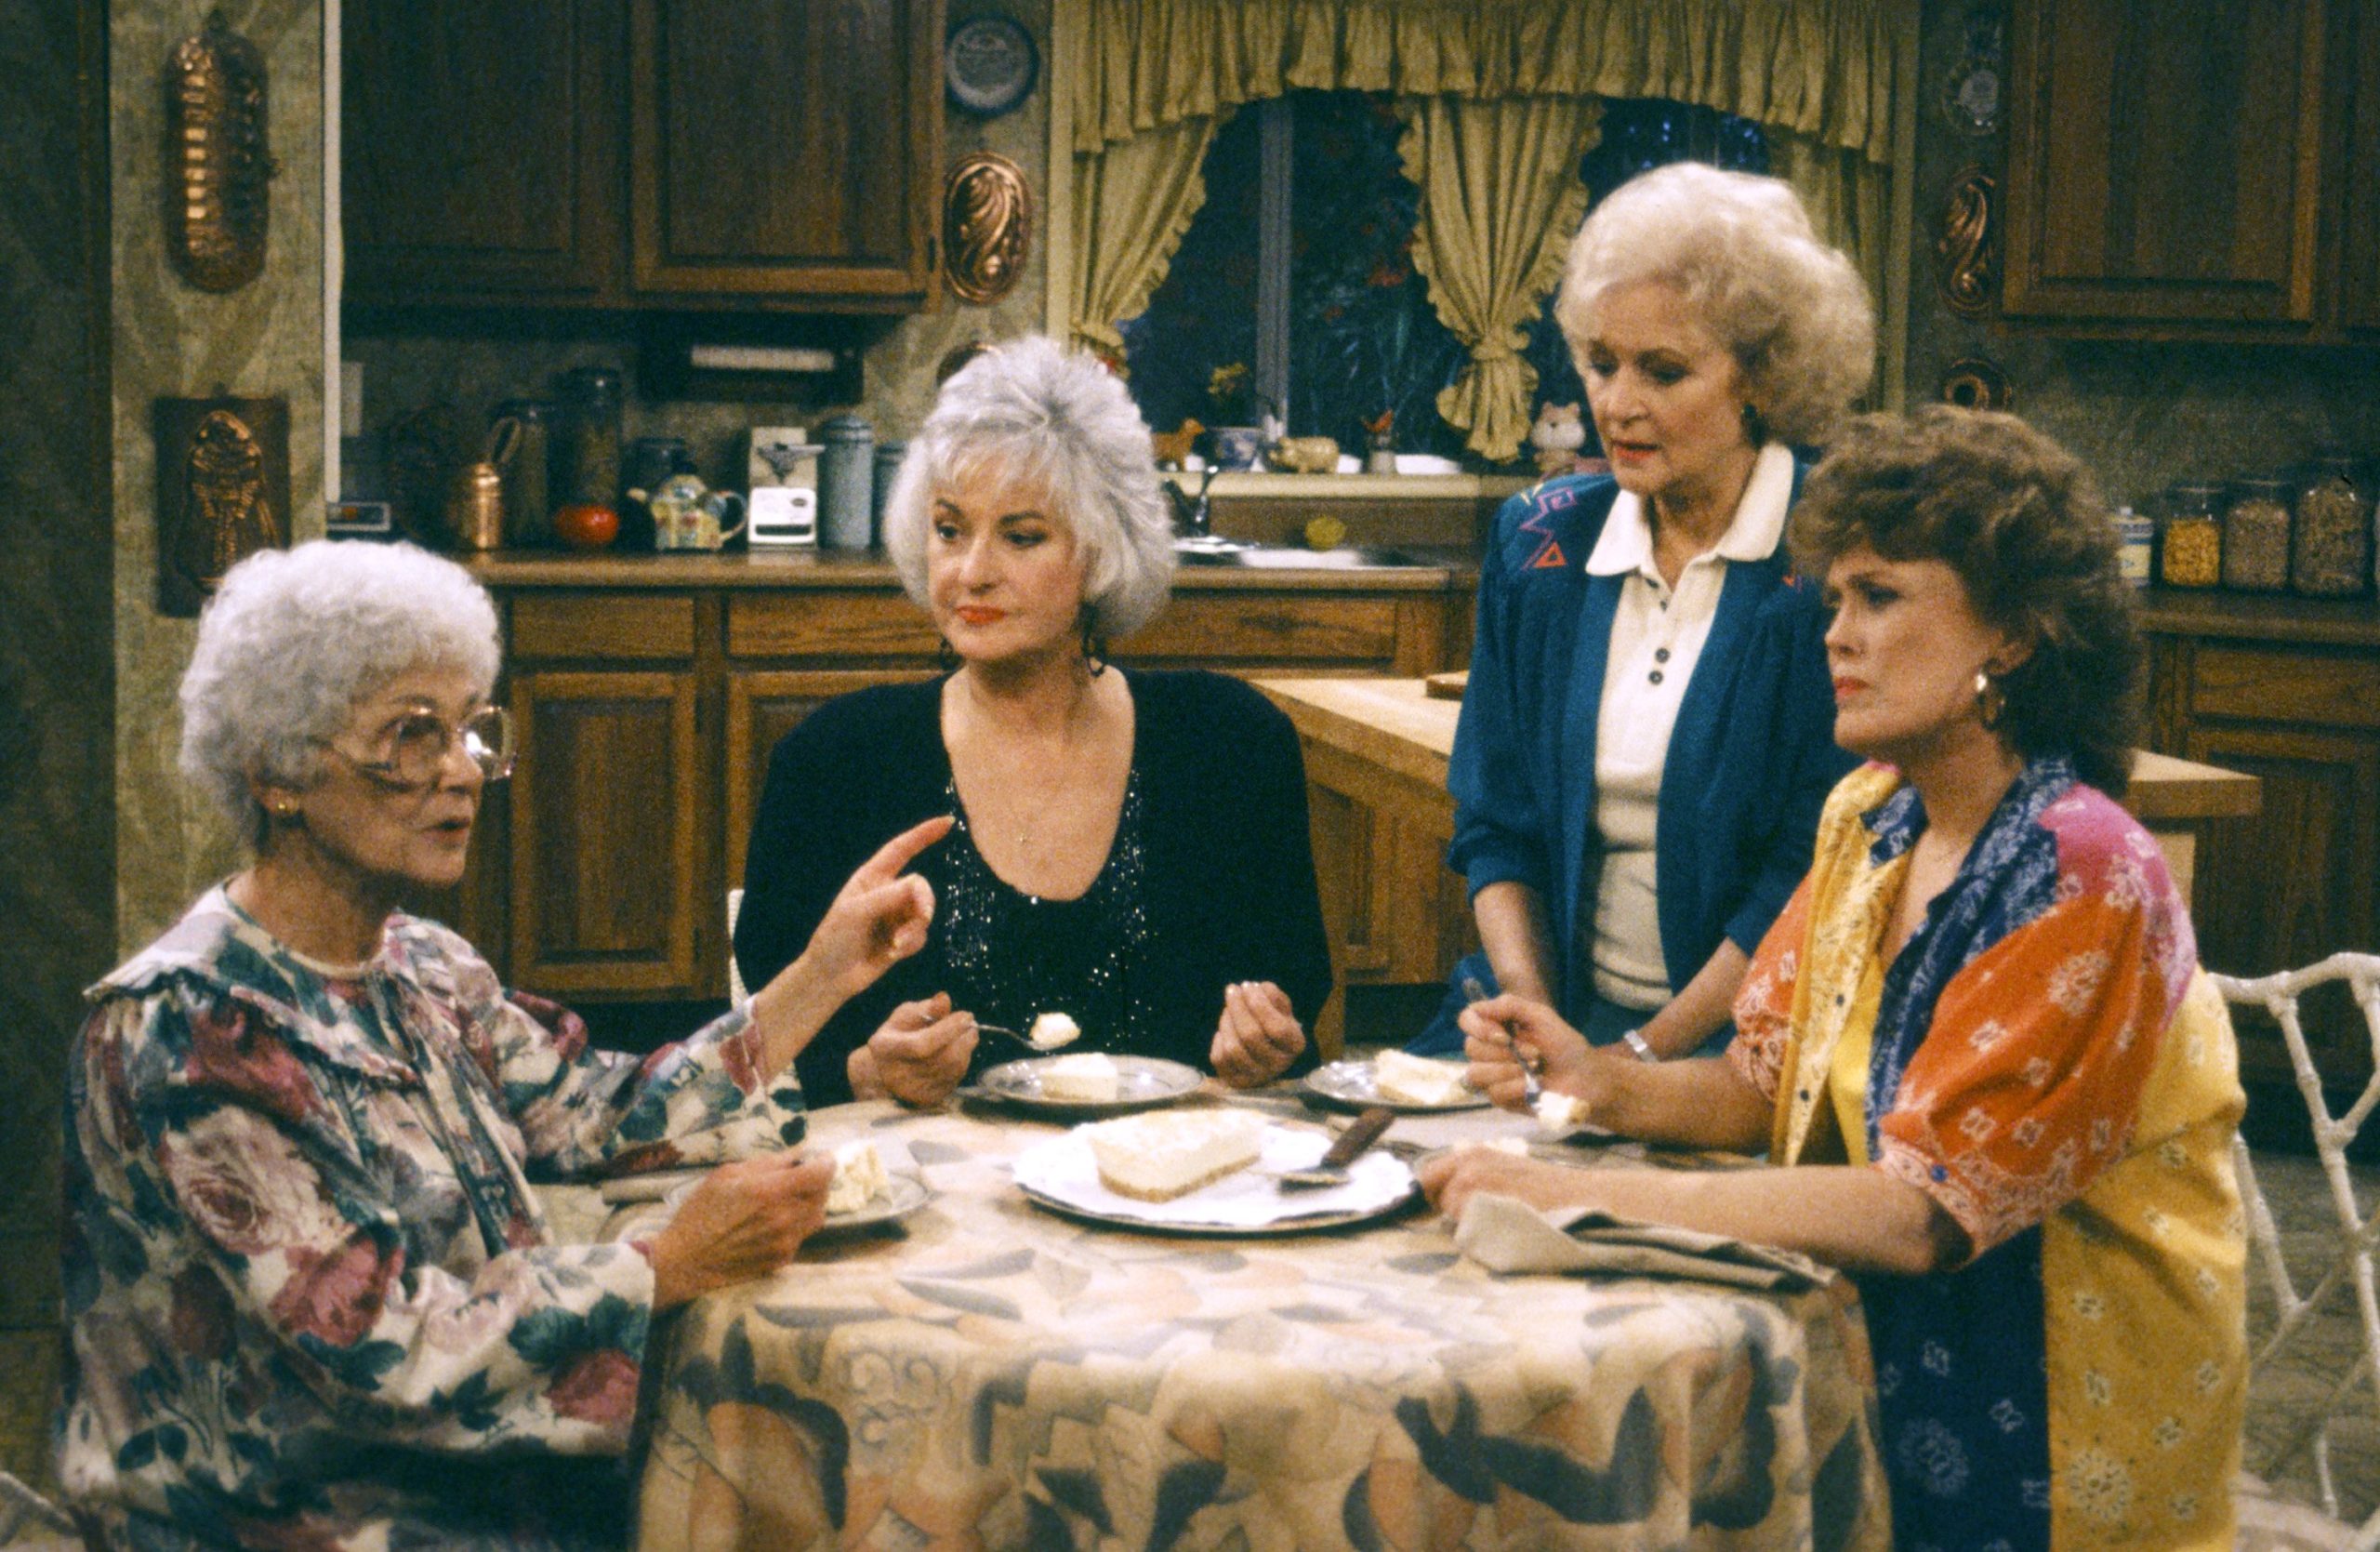 'Boommate' boom: How baby boomers living like 'The Golden Girls' are curbing loneliness and cost burdens